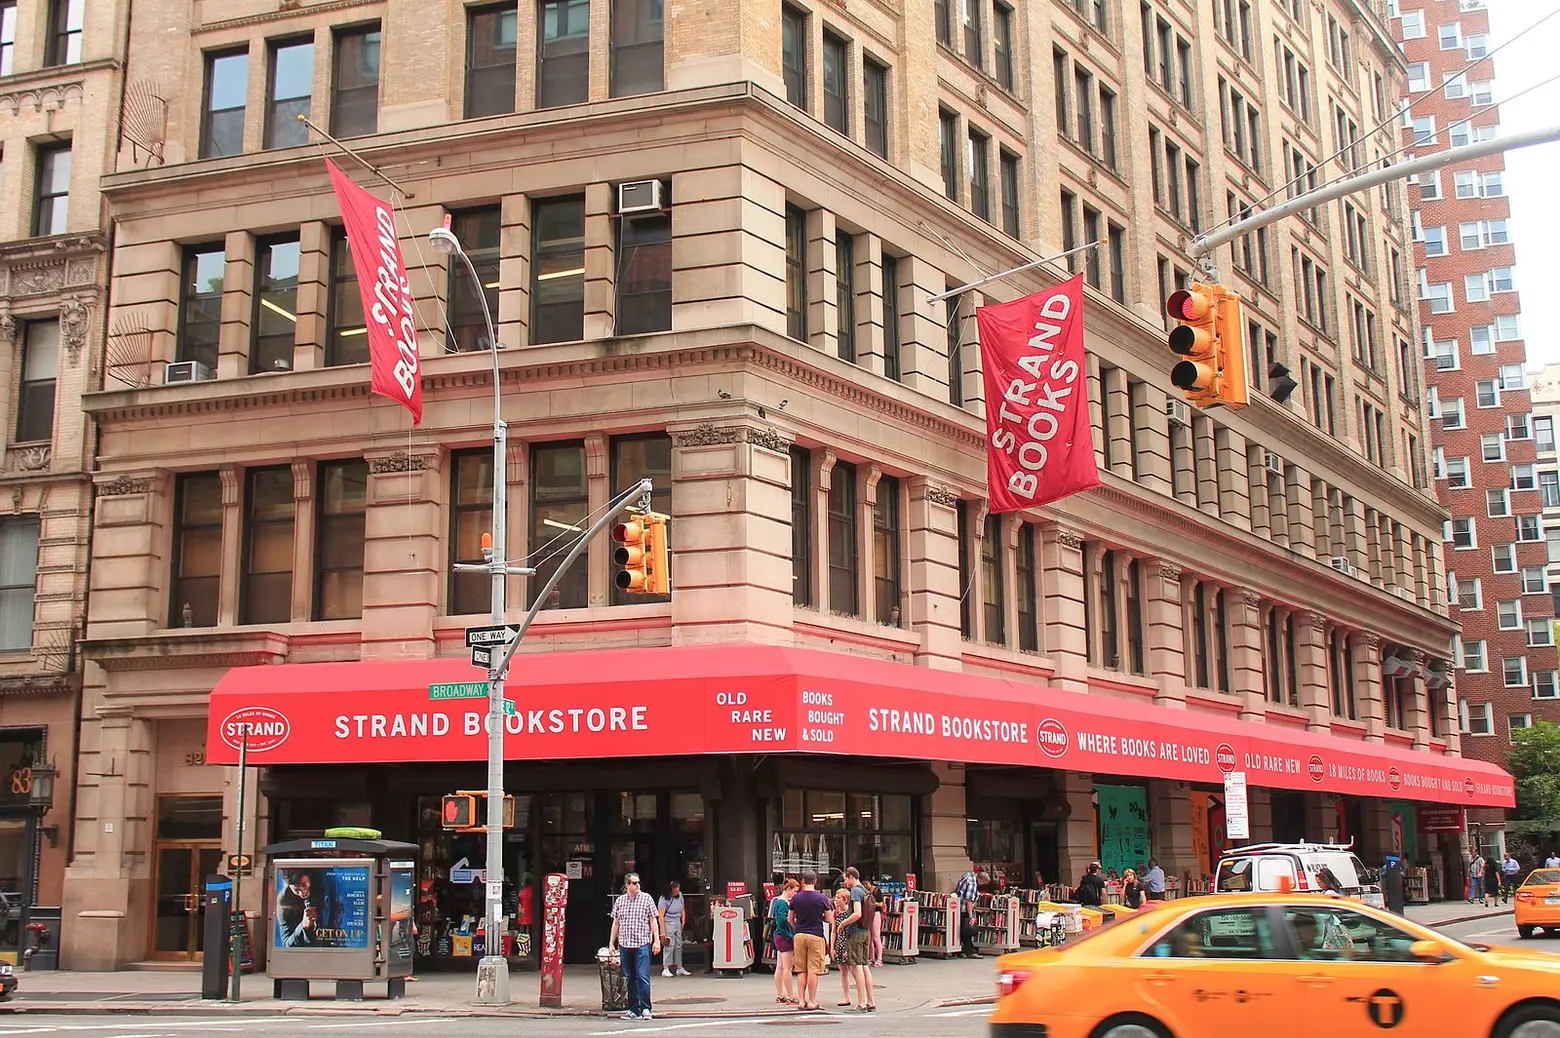 The Strand bookstore gets landmarked, despite opposition from owner and community